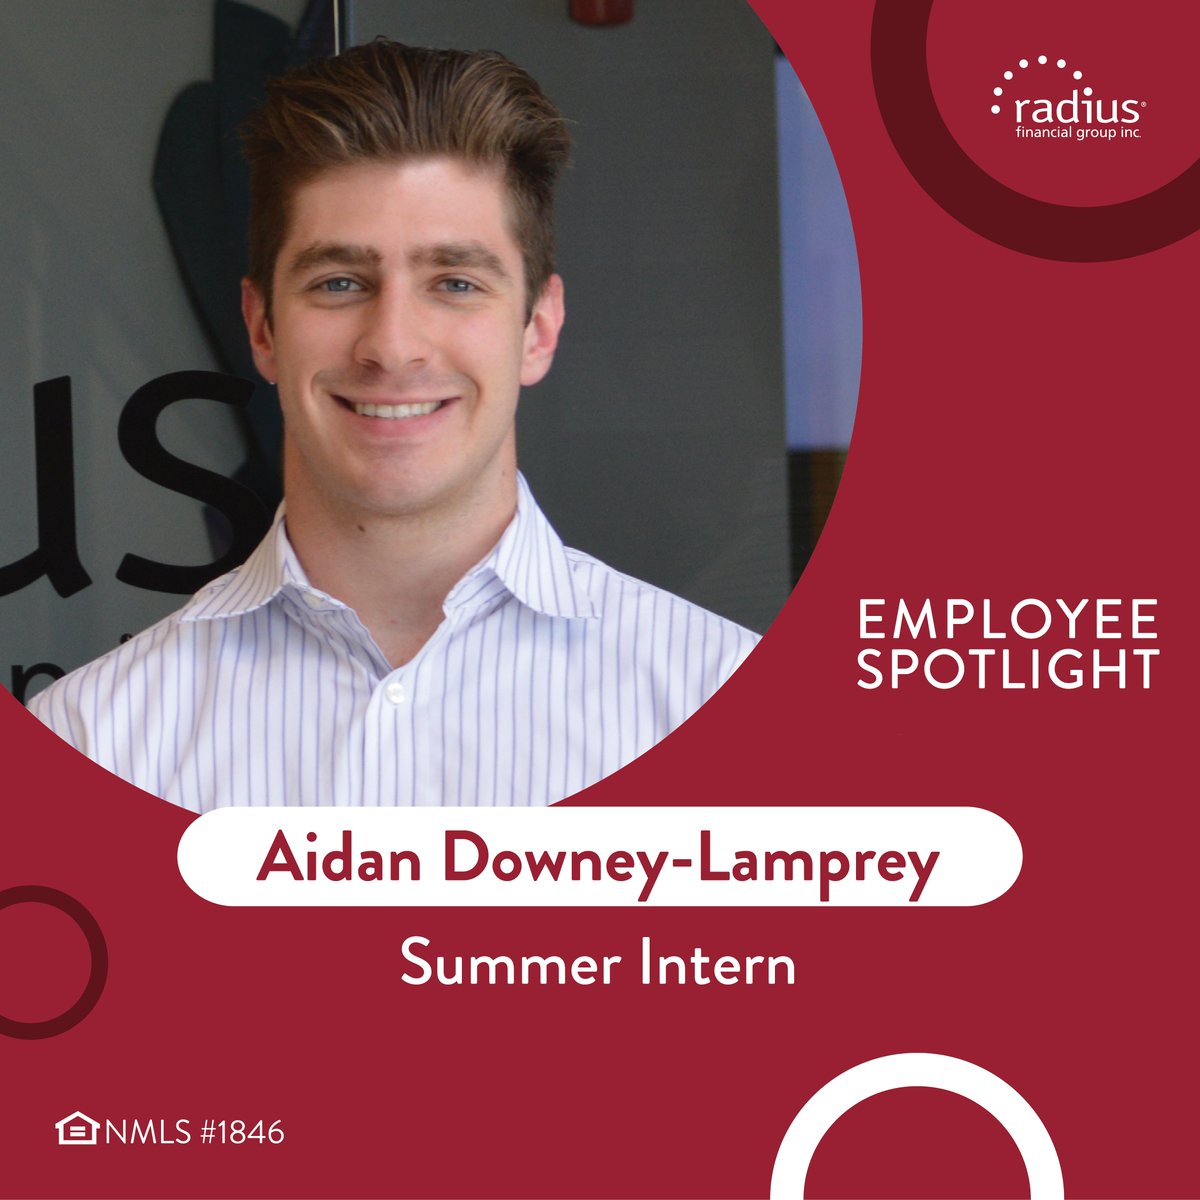 A big radius welcome to Aidan Downey-Lamprey. Aidan joins radius as a Consumer Direct Intern. When he’s not busy #makingmortgagebetter, he enjoys lifting weights, swimming, playing video games, and watching basketball, MMA, and anime. Welcome aboard, Aidan!

#newhire #intern